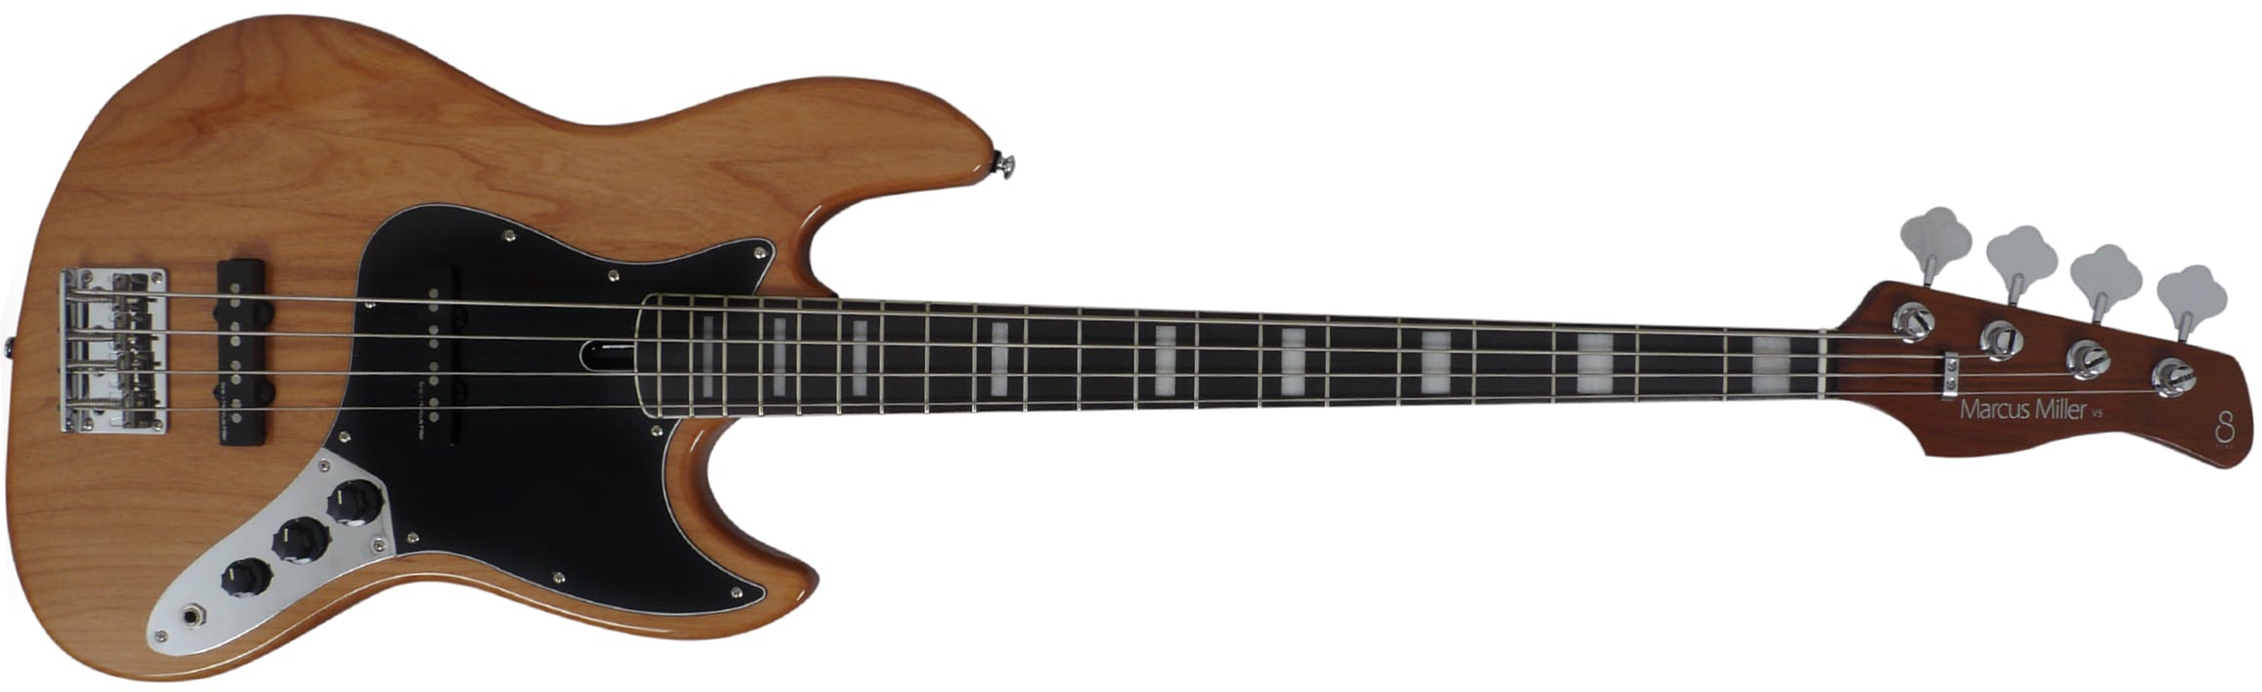 Marcus Miller V5r 4st Rw - Natural - Solidbody E-bass - Main picture